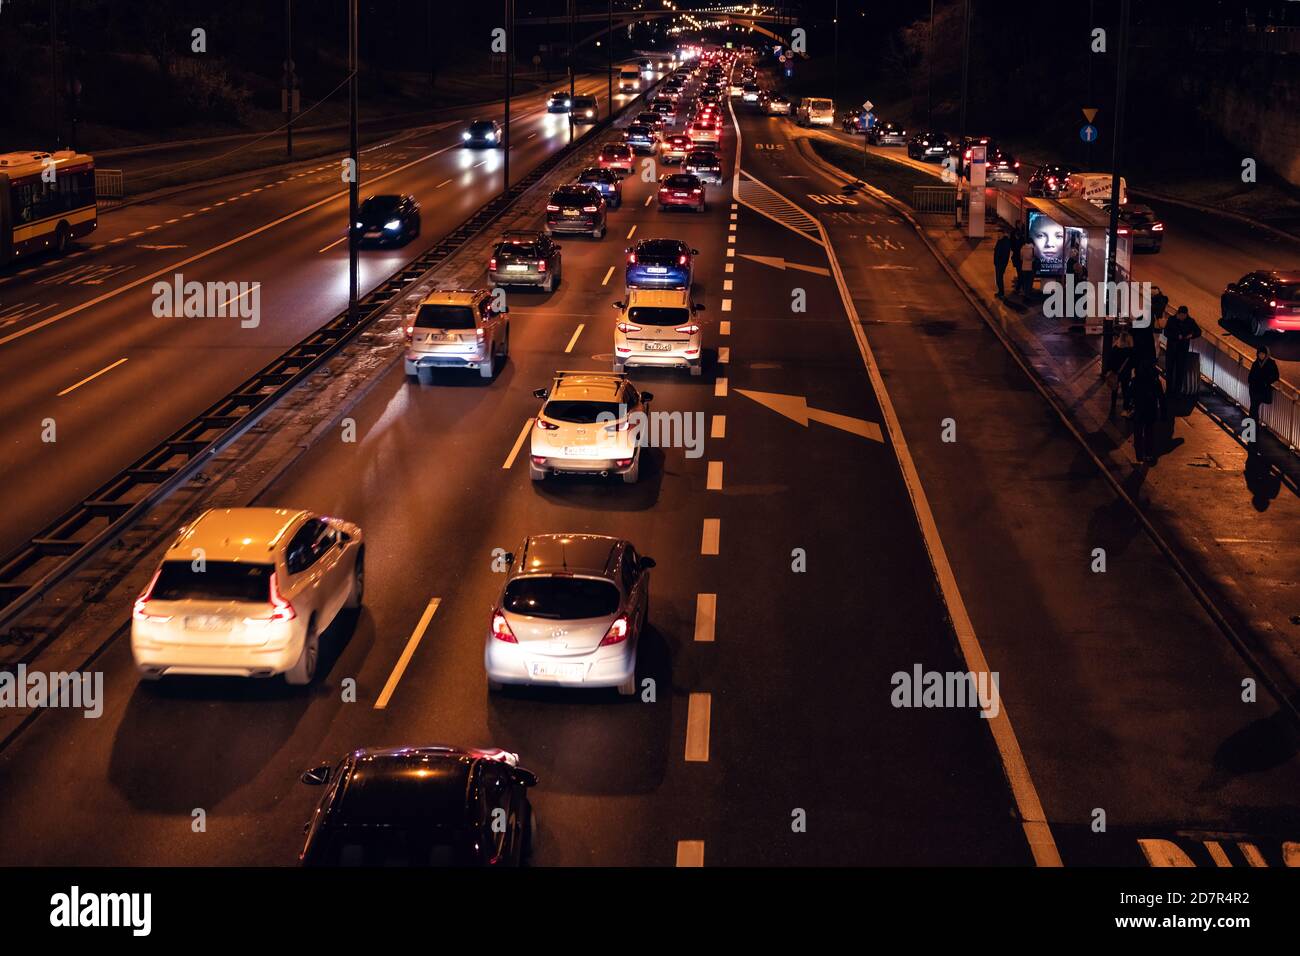 Warsaw, Poland - December 20, 2019: Above high angle aerial view of Aleja Armii Ludowej street avenue in Warszawa at night with traffic cars passing b Stock Photo